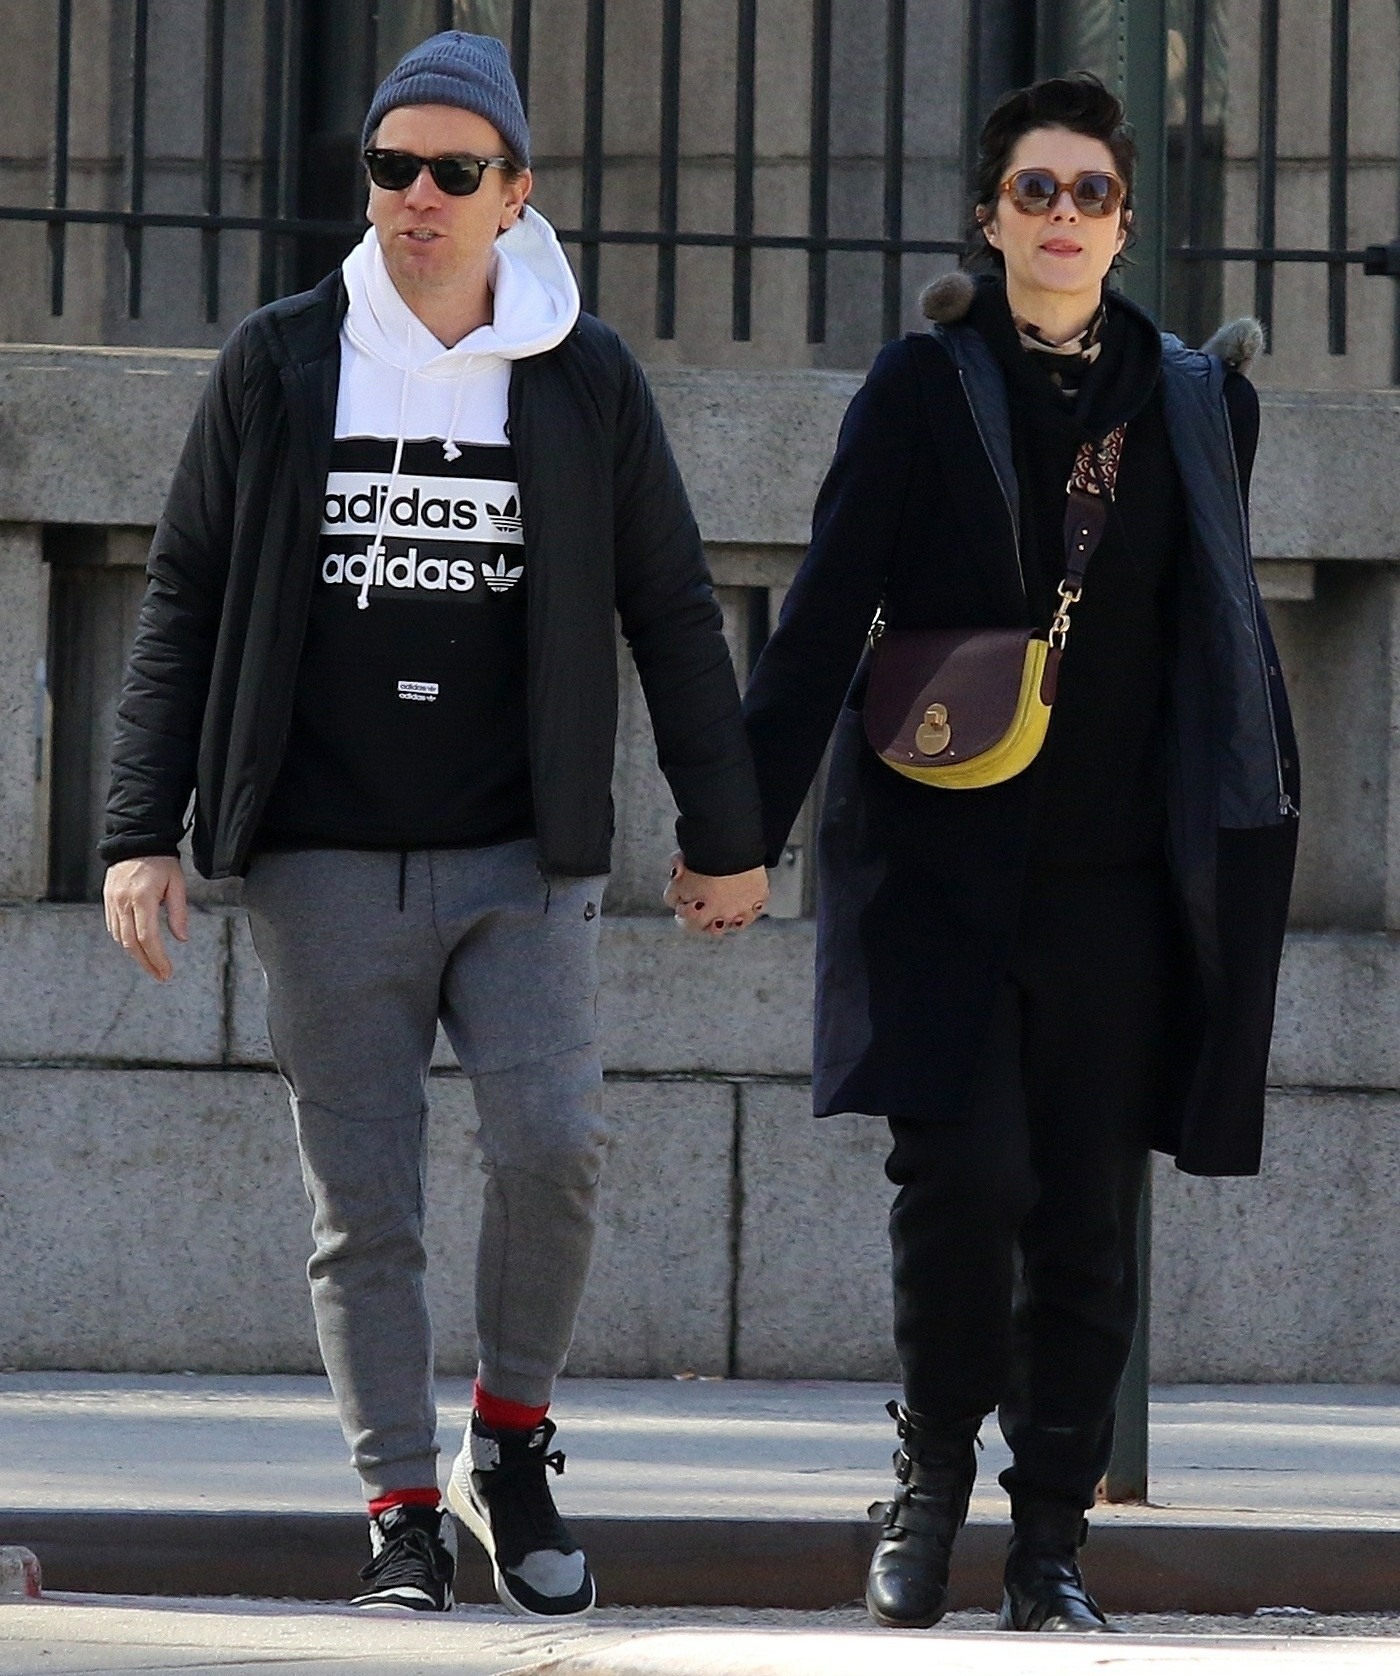 Ewan McGregor and Mary Elizabeth Winstead share some PDA moments on a romantic day out amid "Coronavirus" outbreak in NYC